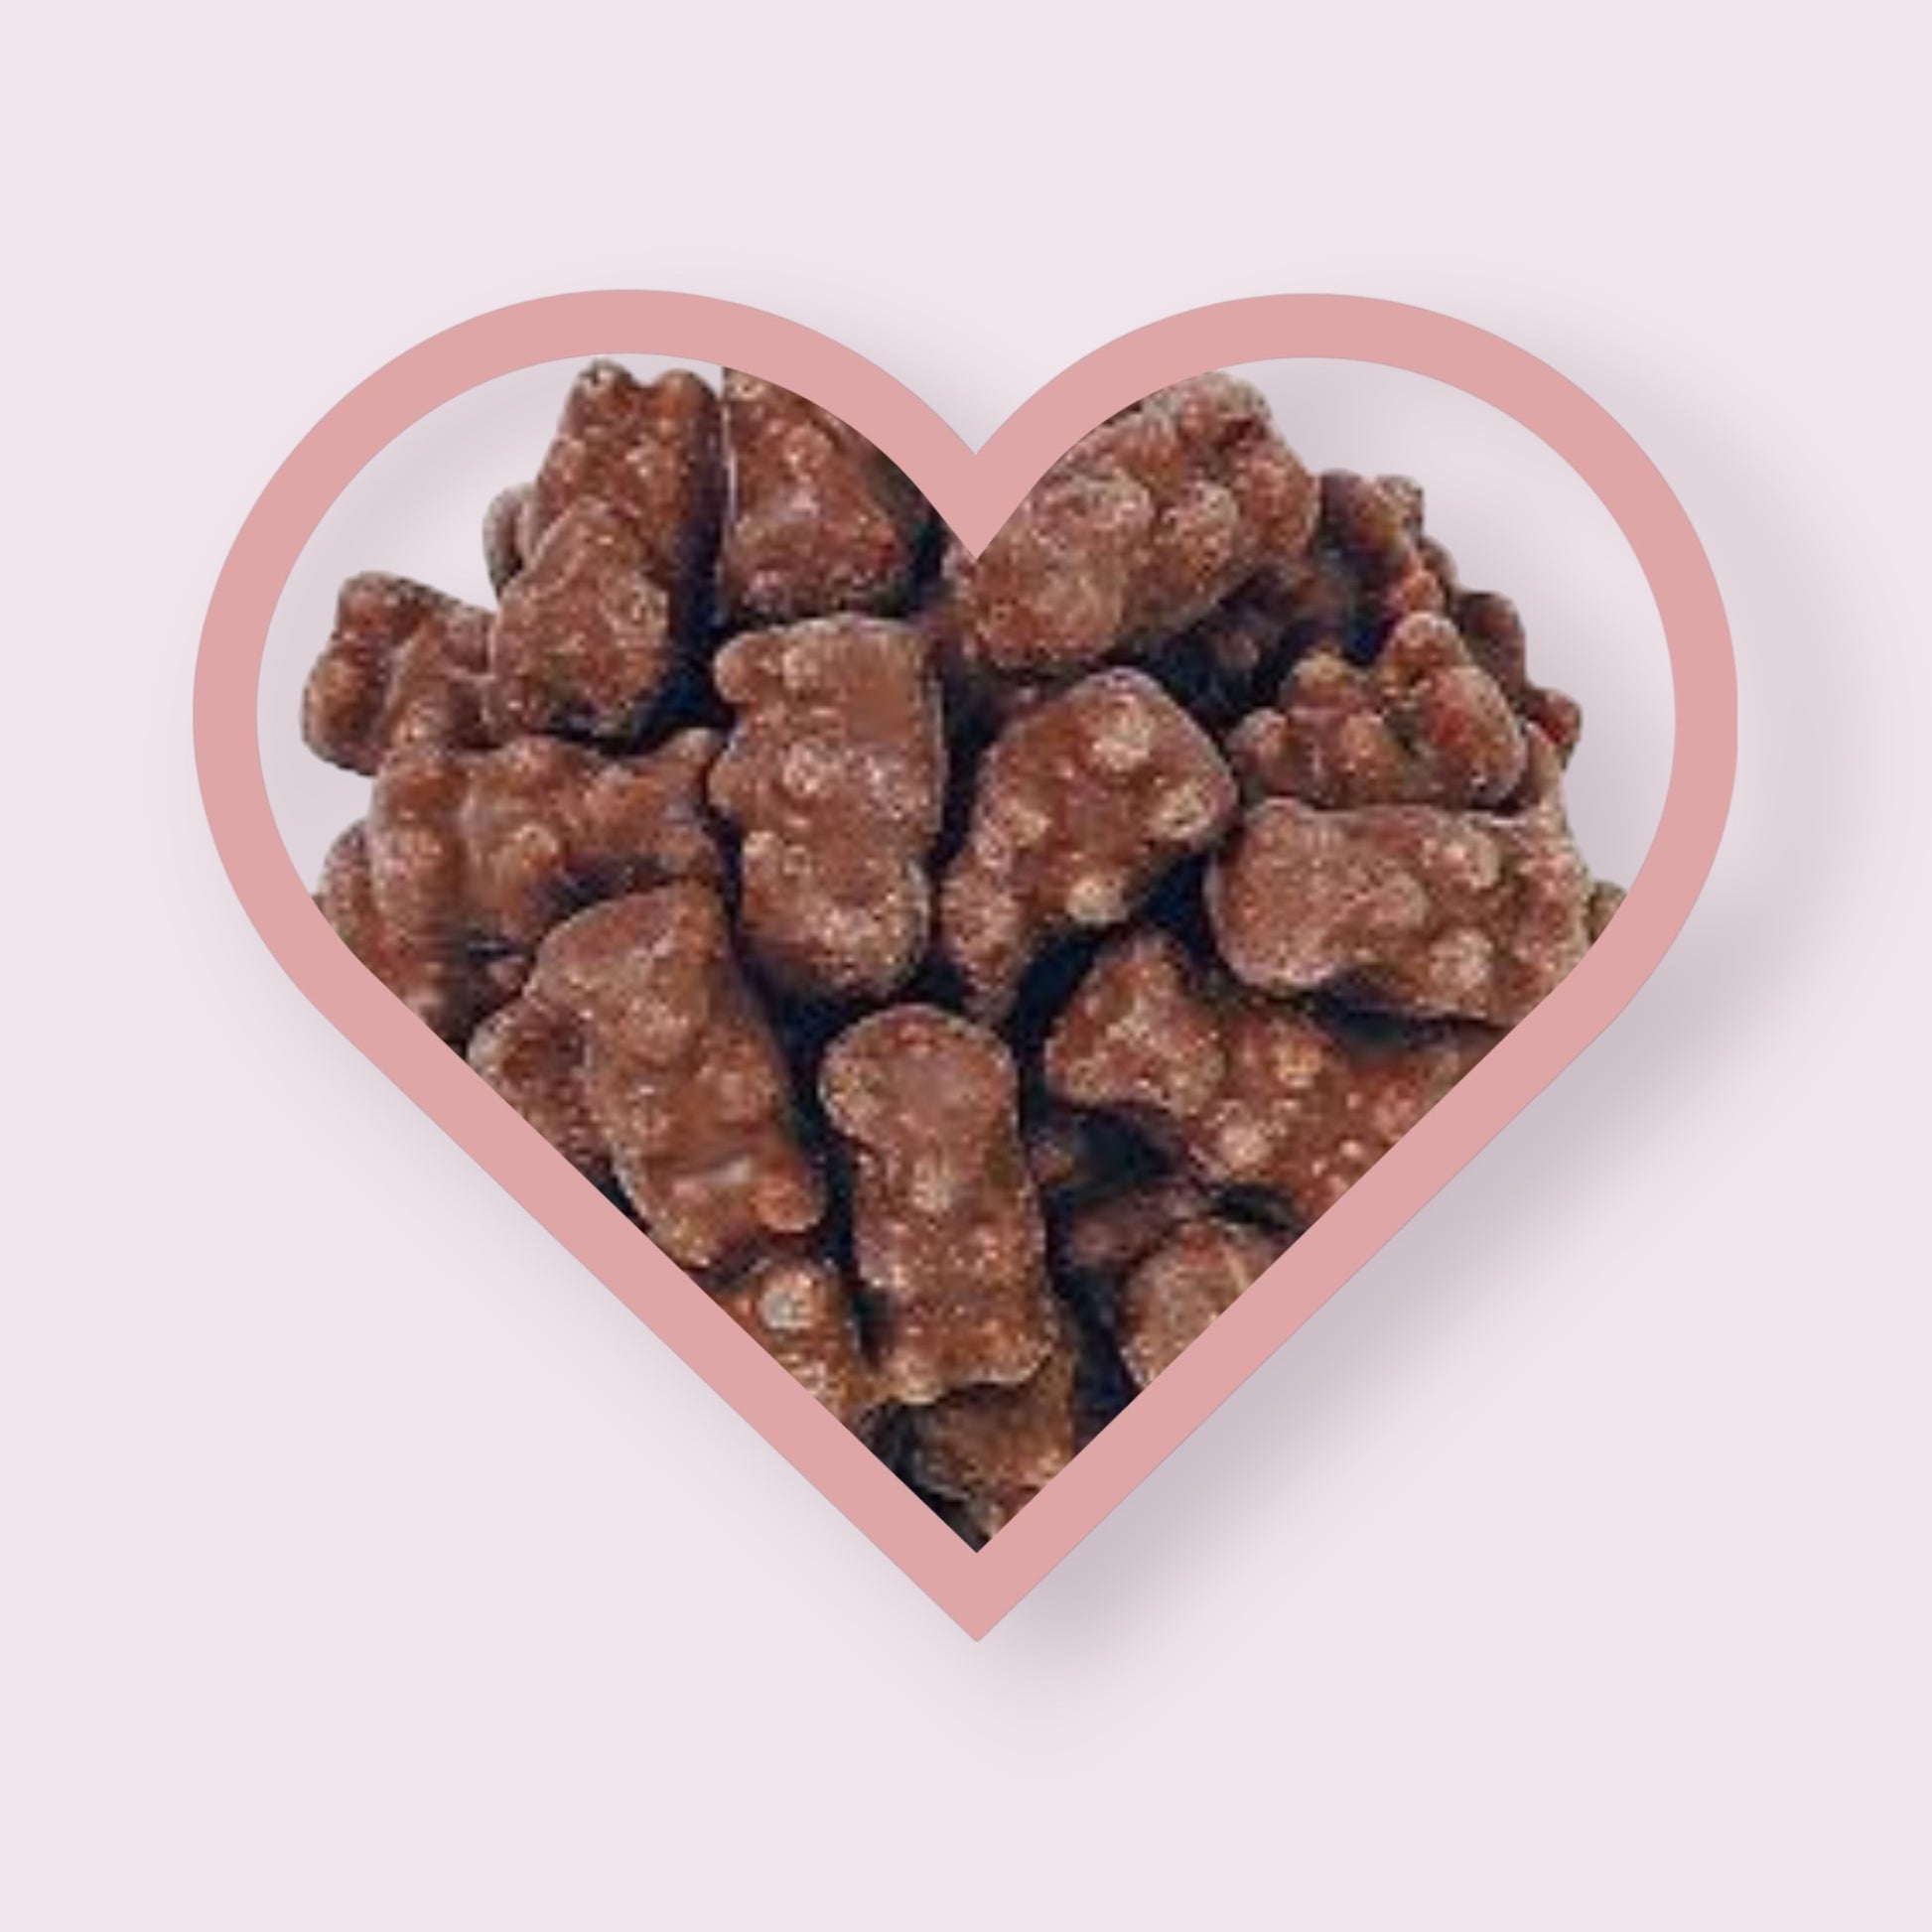 Kopper's Chocolate Covered Gummy Bears Chocolate Pixie Candy Shoppe   